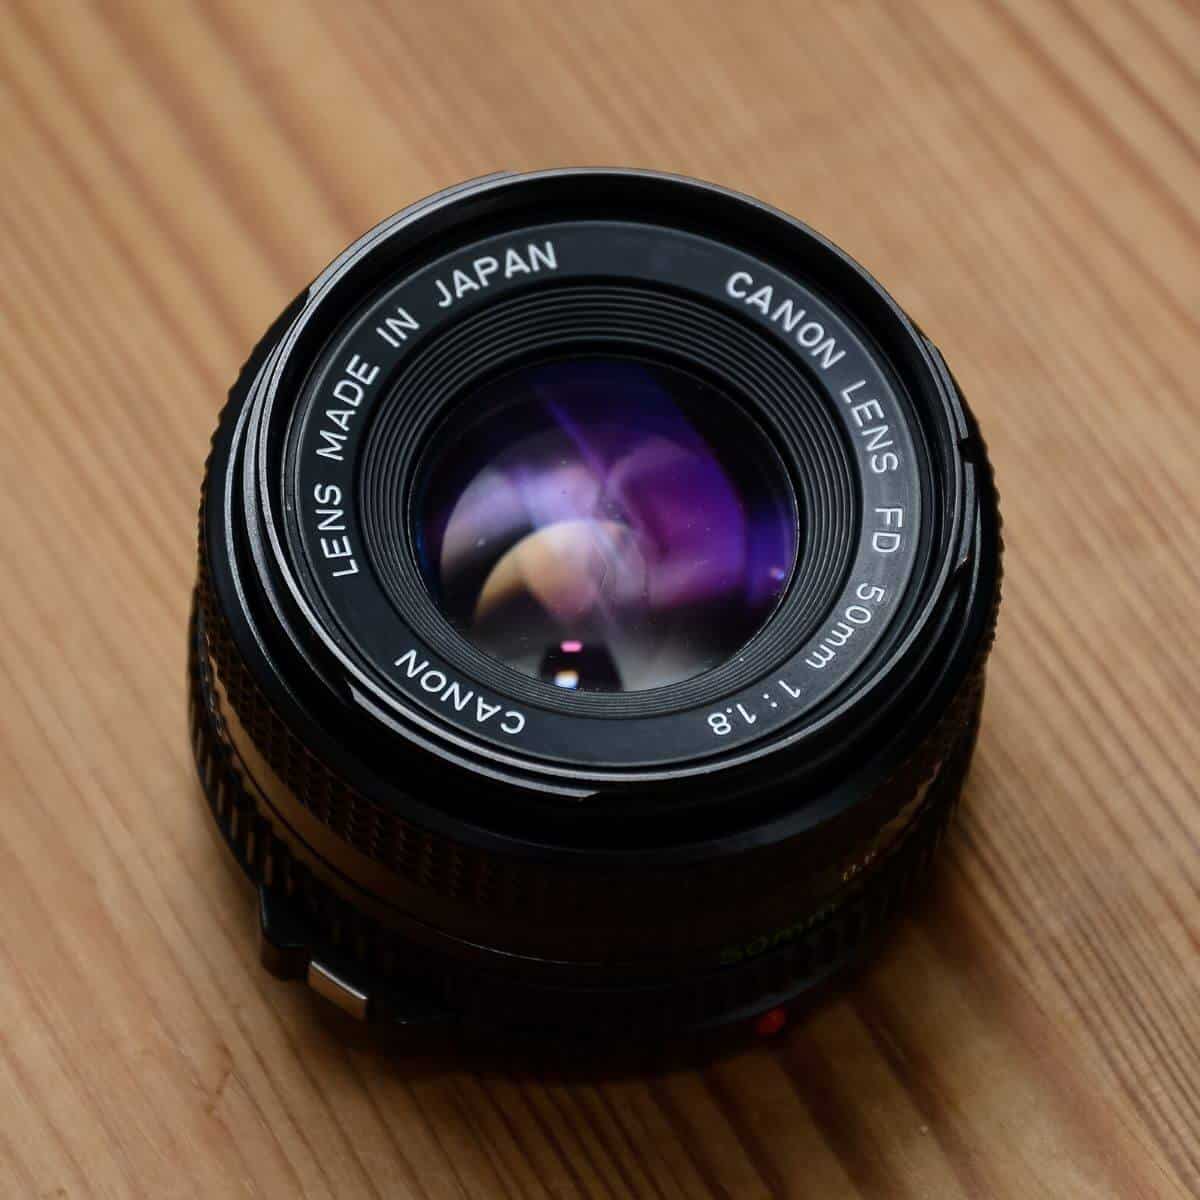 Canon 50mm lens on a wooden table.